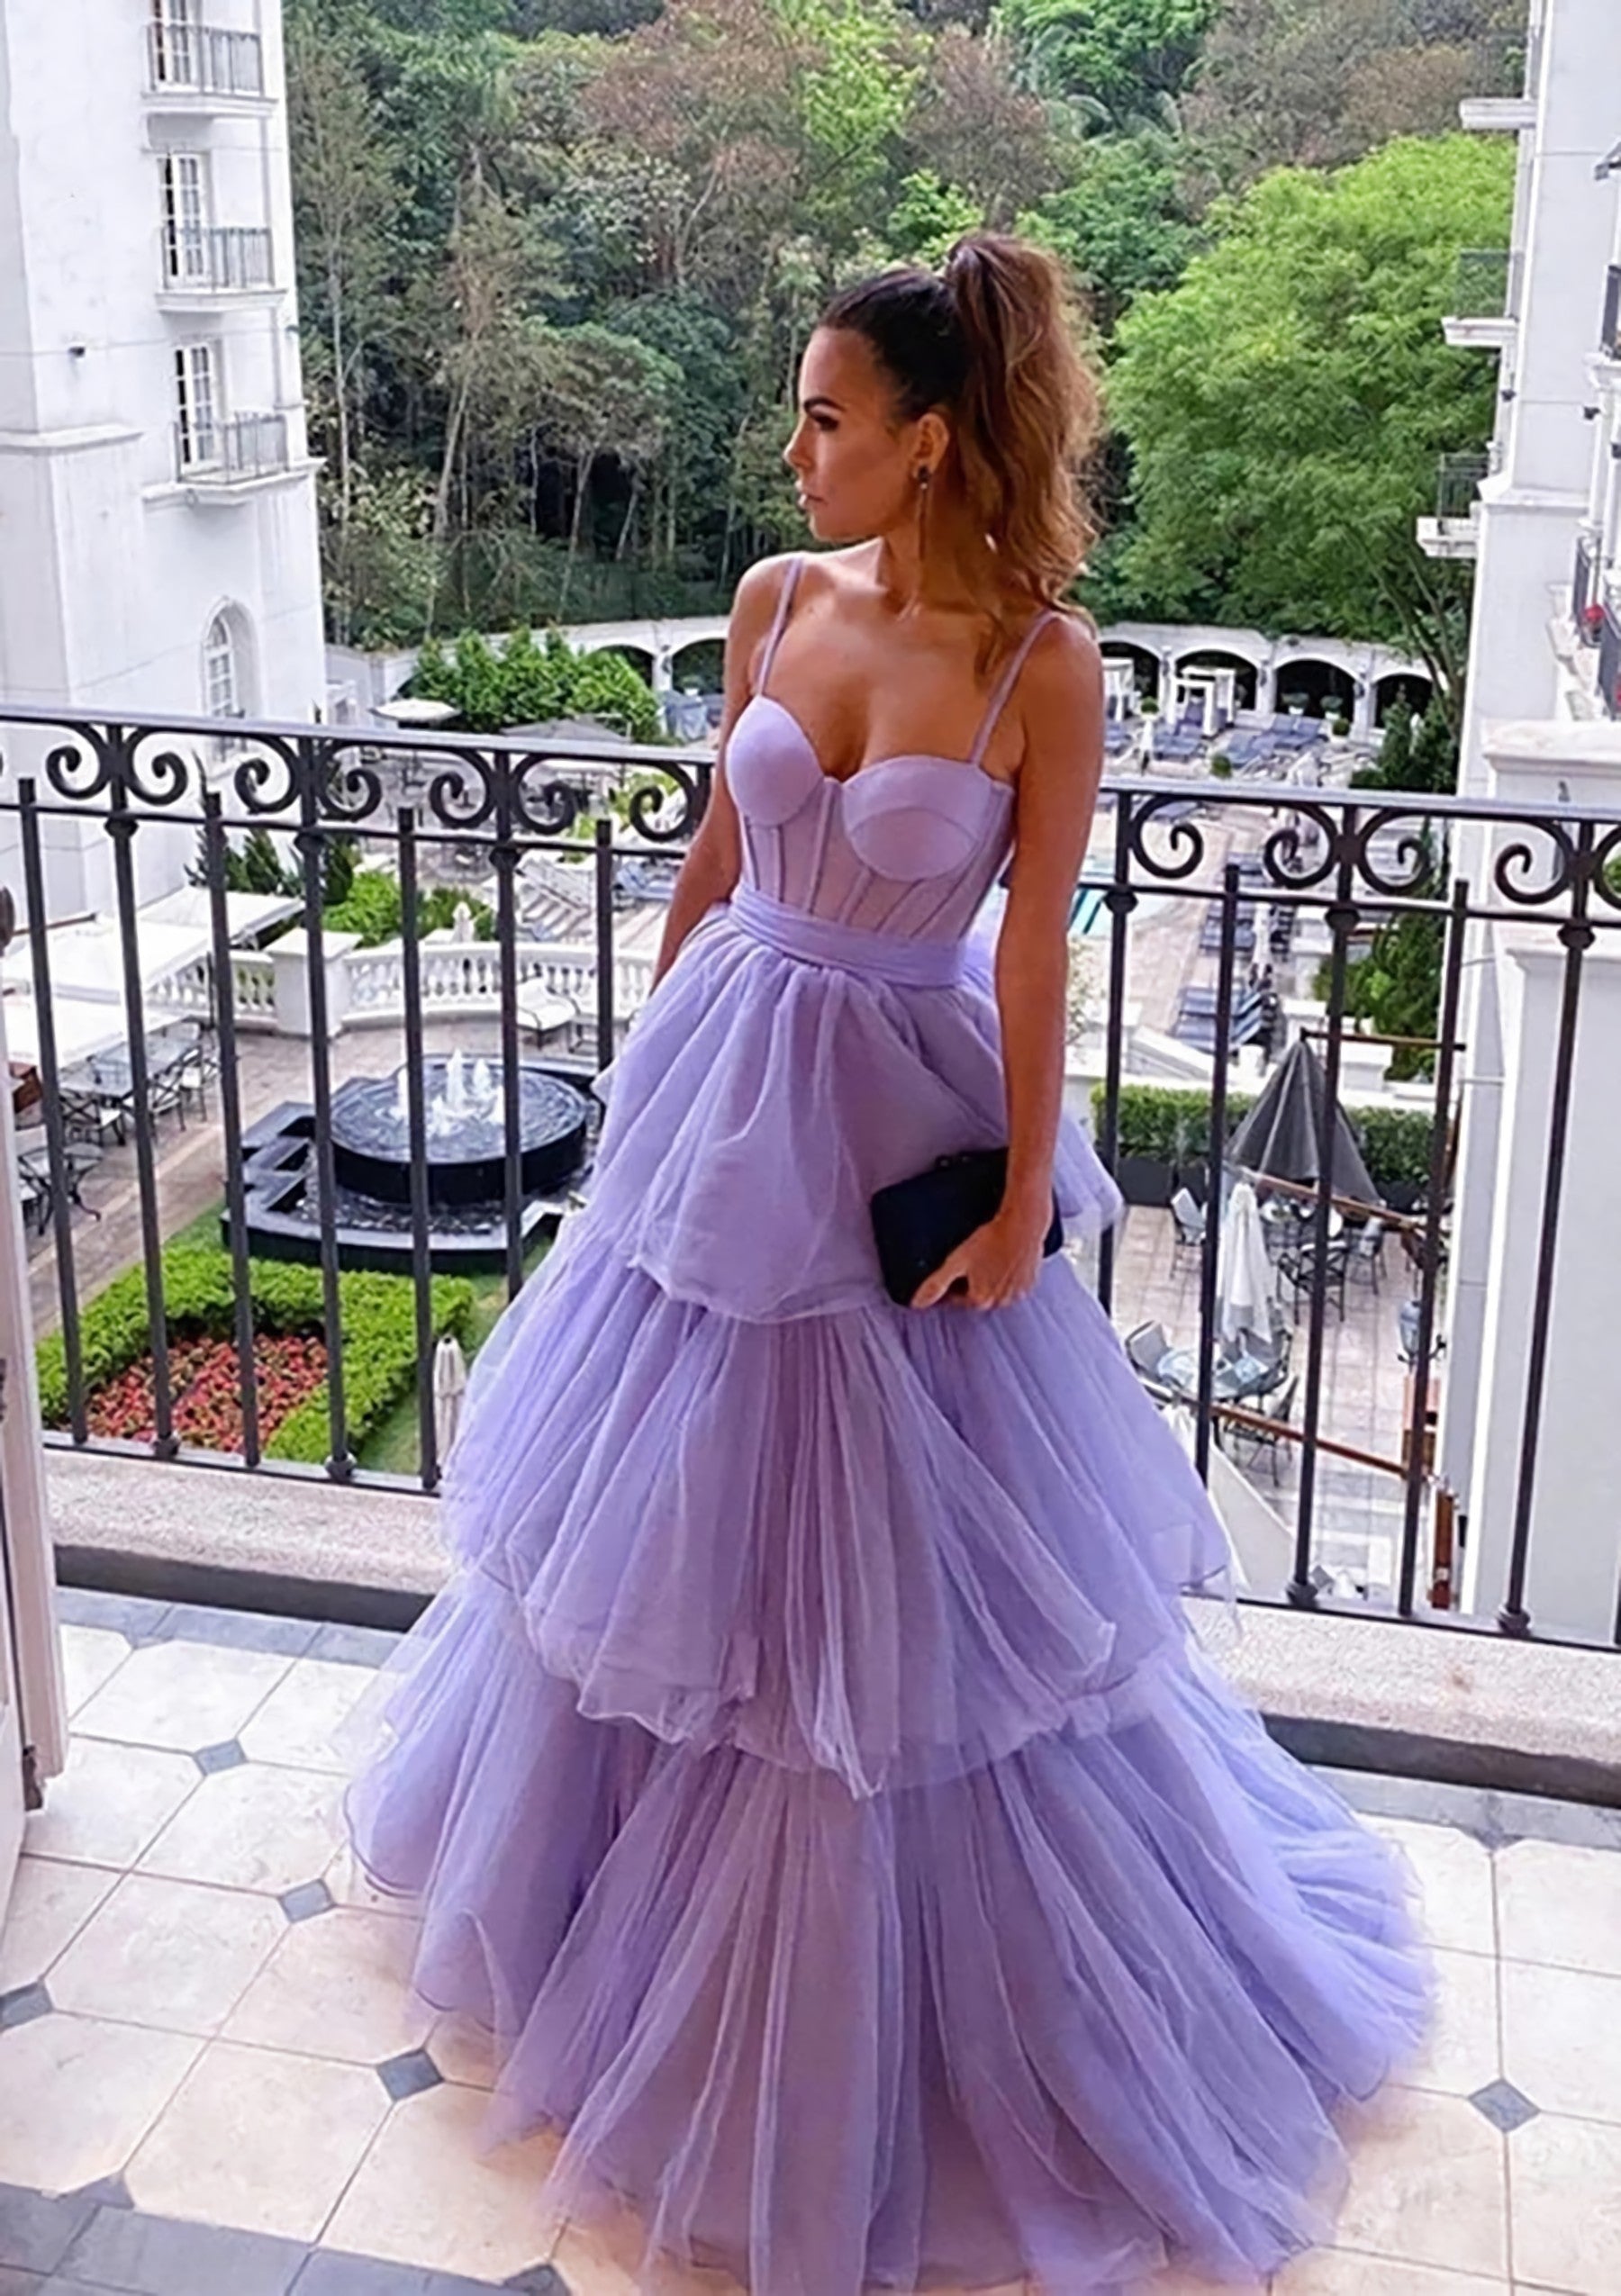 A-line Sweetheart Sleeveless Long/Floor-Length Tulle Corset Prom Dress With Ruffles Gowns, Bridesmaid Dresses Dusty Blue